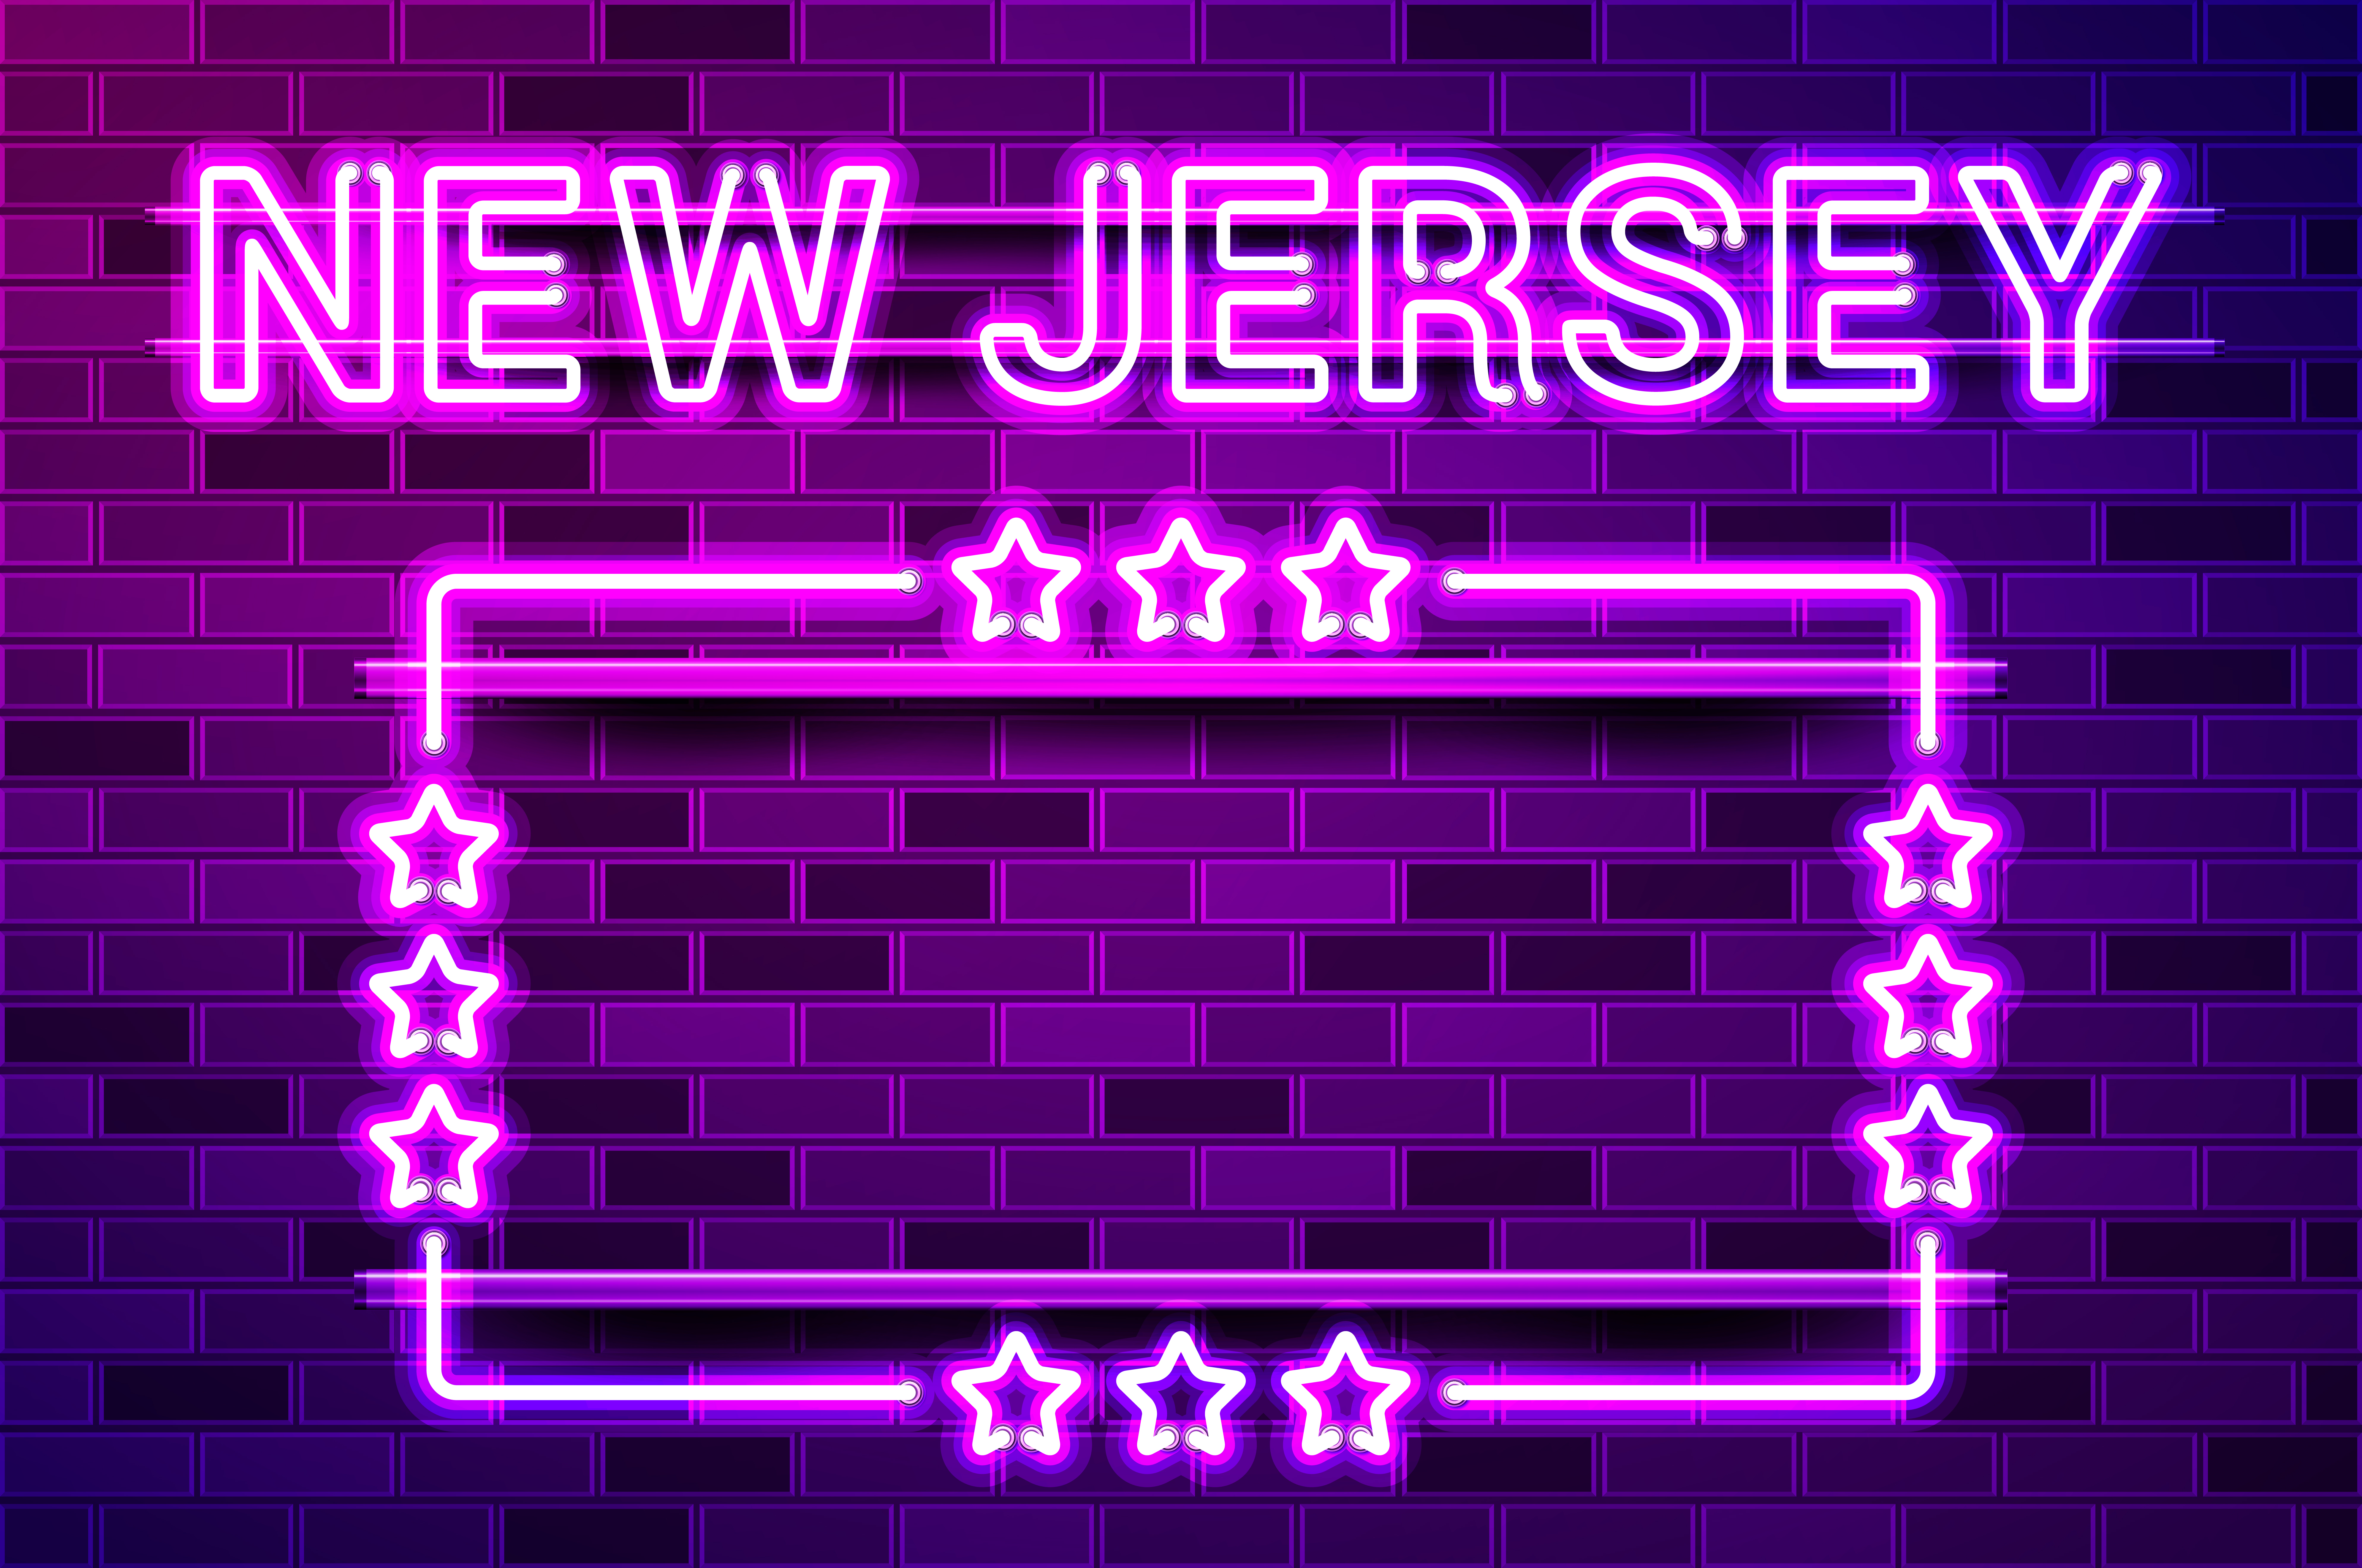 New Jersey US State glowing purple neon lettering and a rectangular frame with stars. Realistic vector illustration. Purple brick wall, violet glow, metal holders.. New Jersey US State glowing purple neon lettering and a rectangular frame with stars